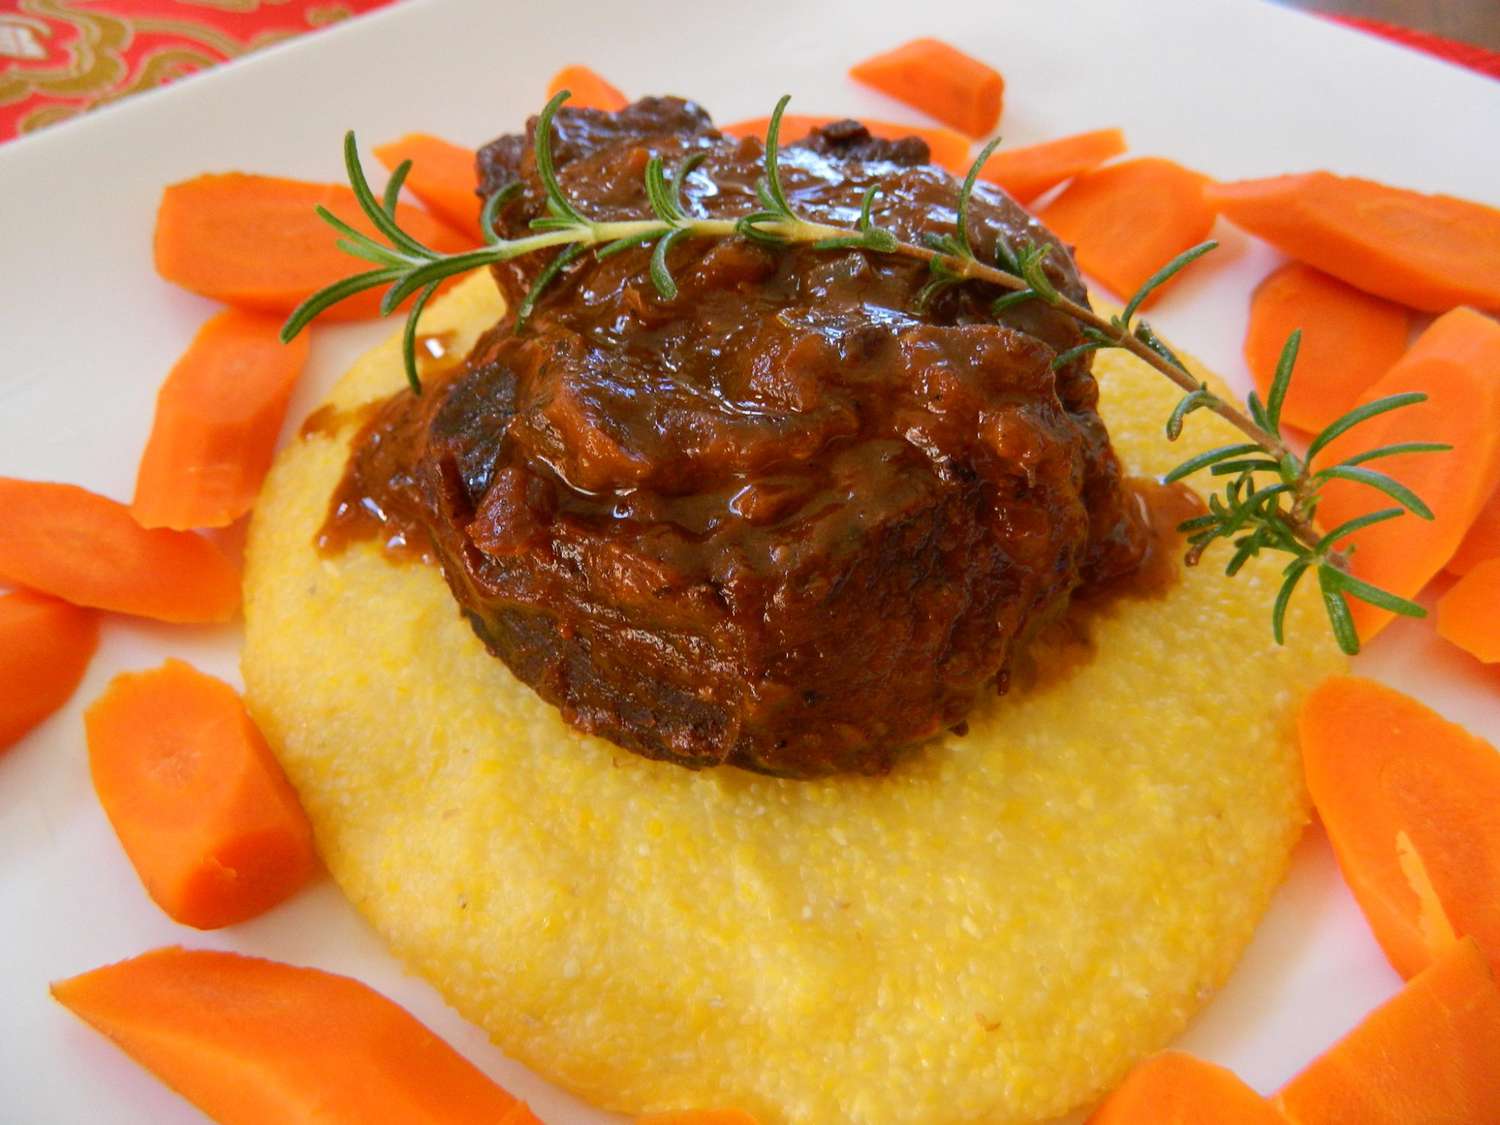 a serving of braised beef ribs on soft polenta, garnished with a fresh thyme sprig